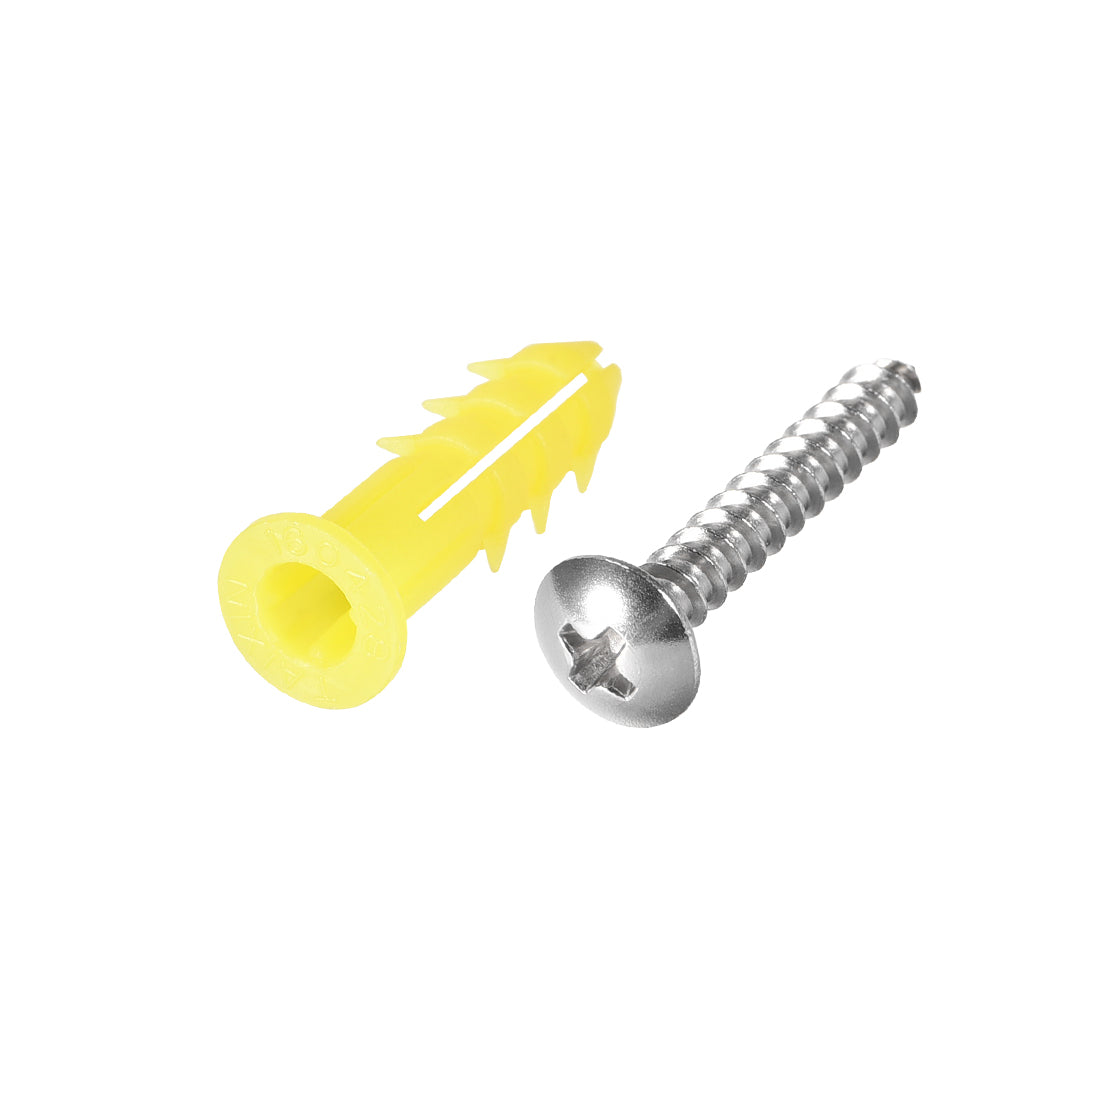 uxcell Uxcell 6 x 26mm Plastic Expansion Tube for Drywall with Screws, Yellow 20pcs